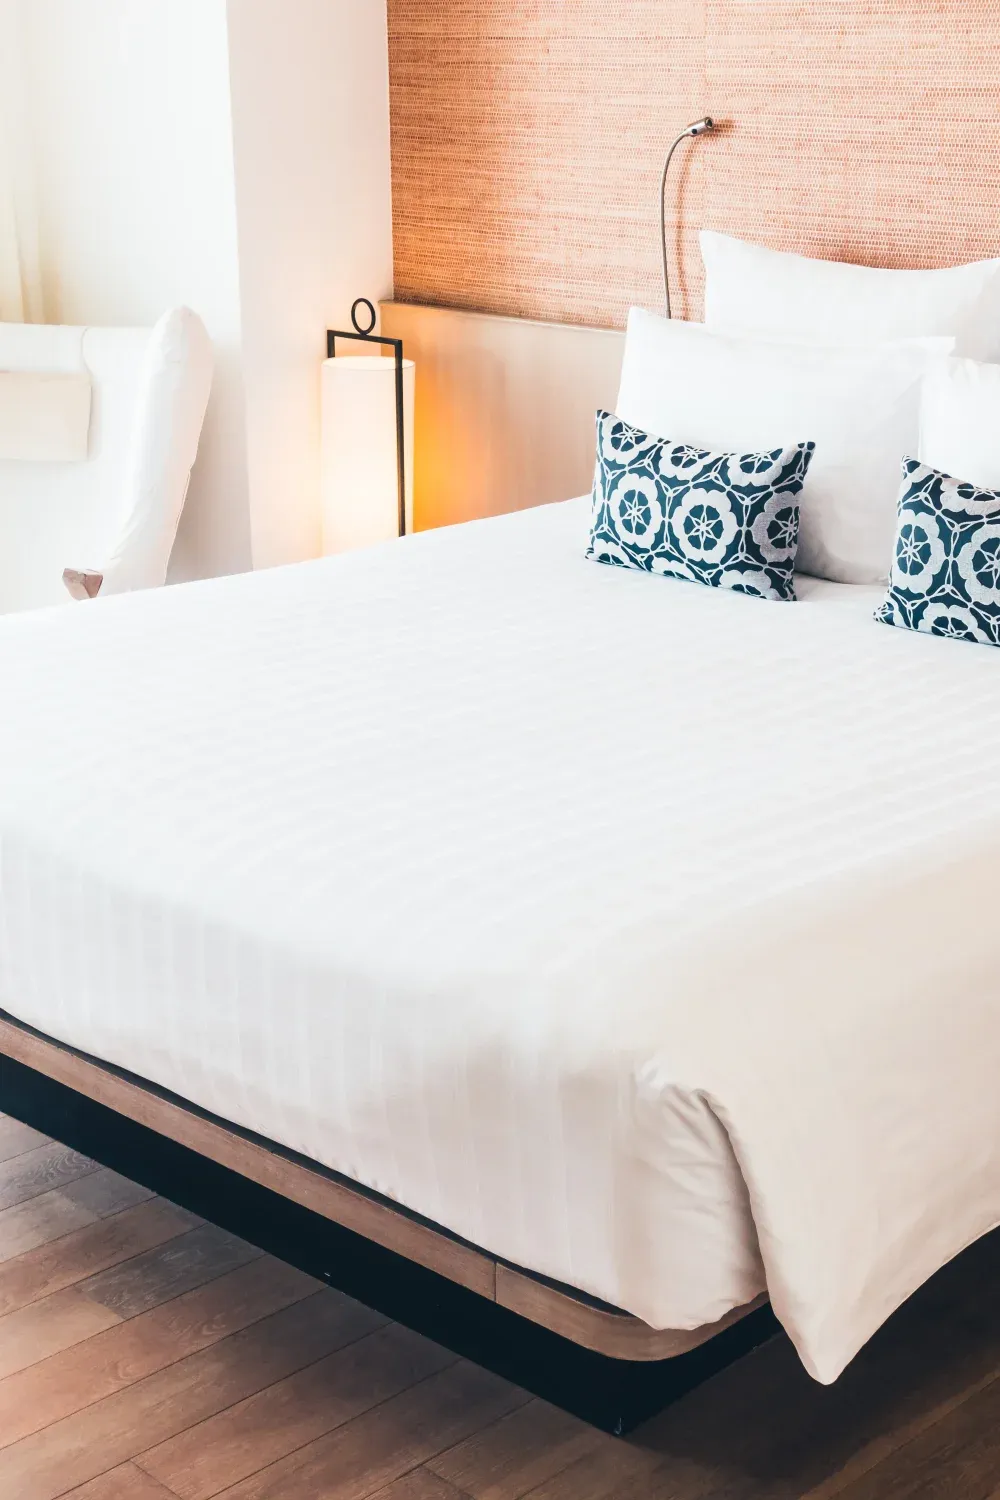 MATTRESS CLEANING IN ABBOTSFORD, BC